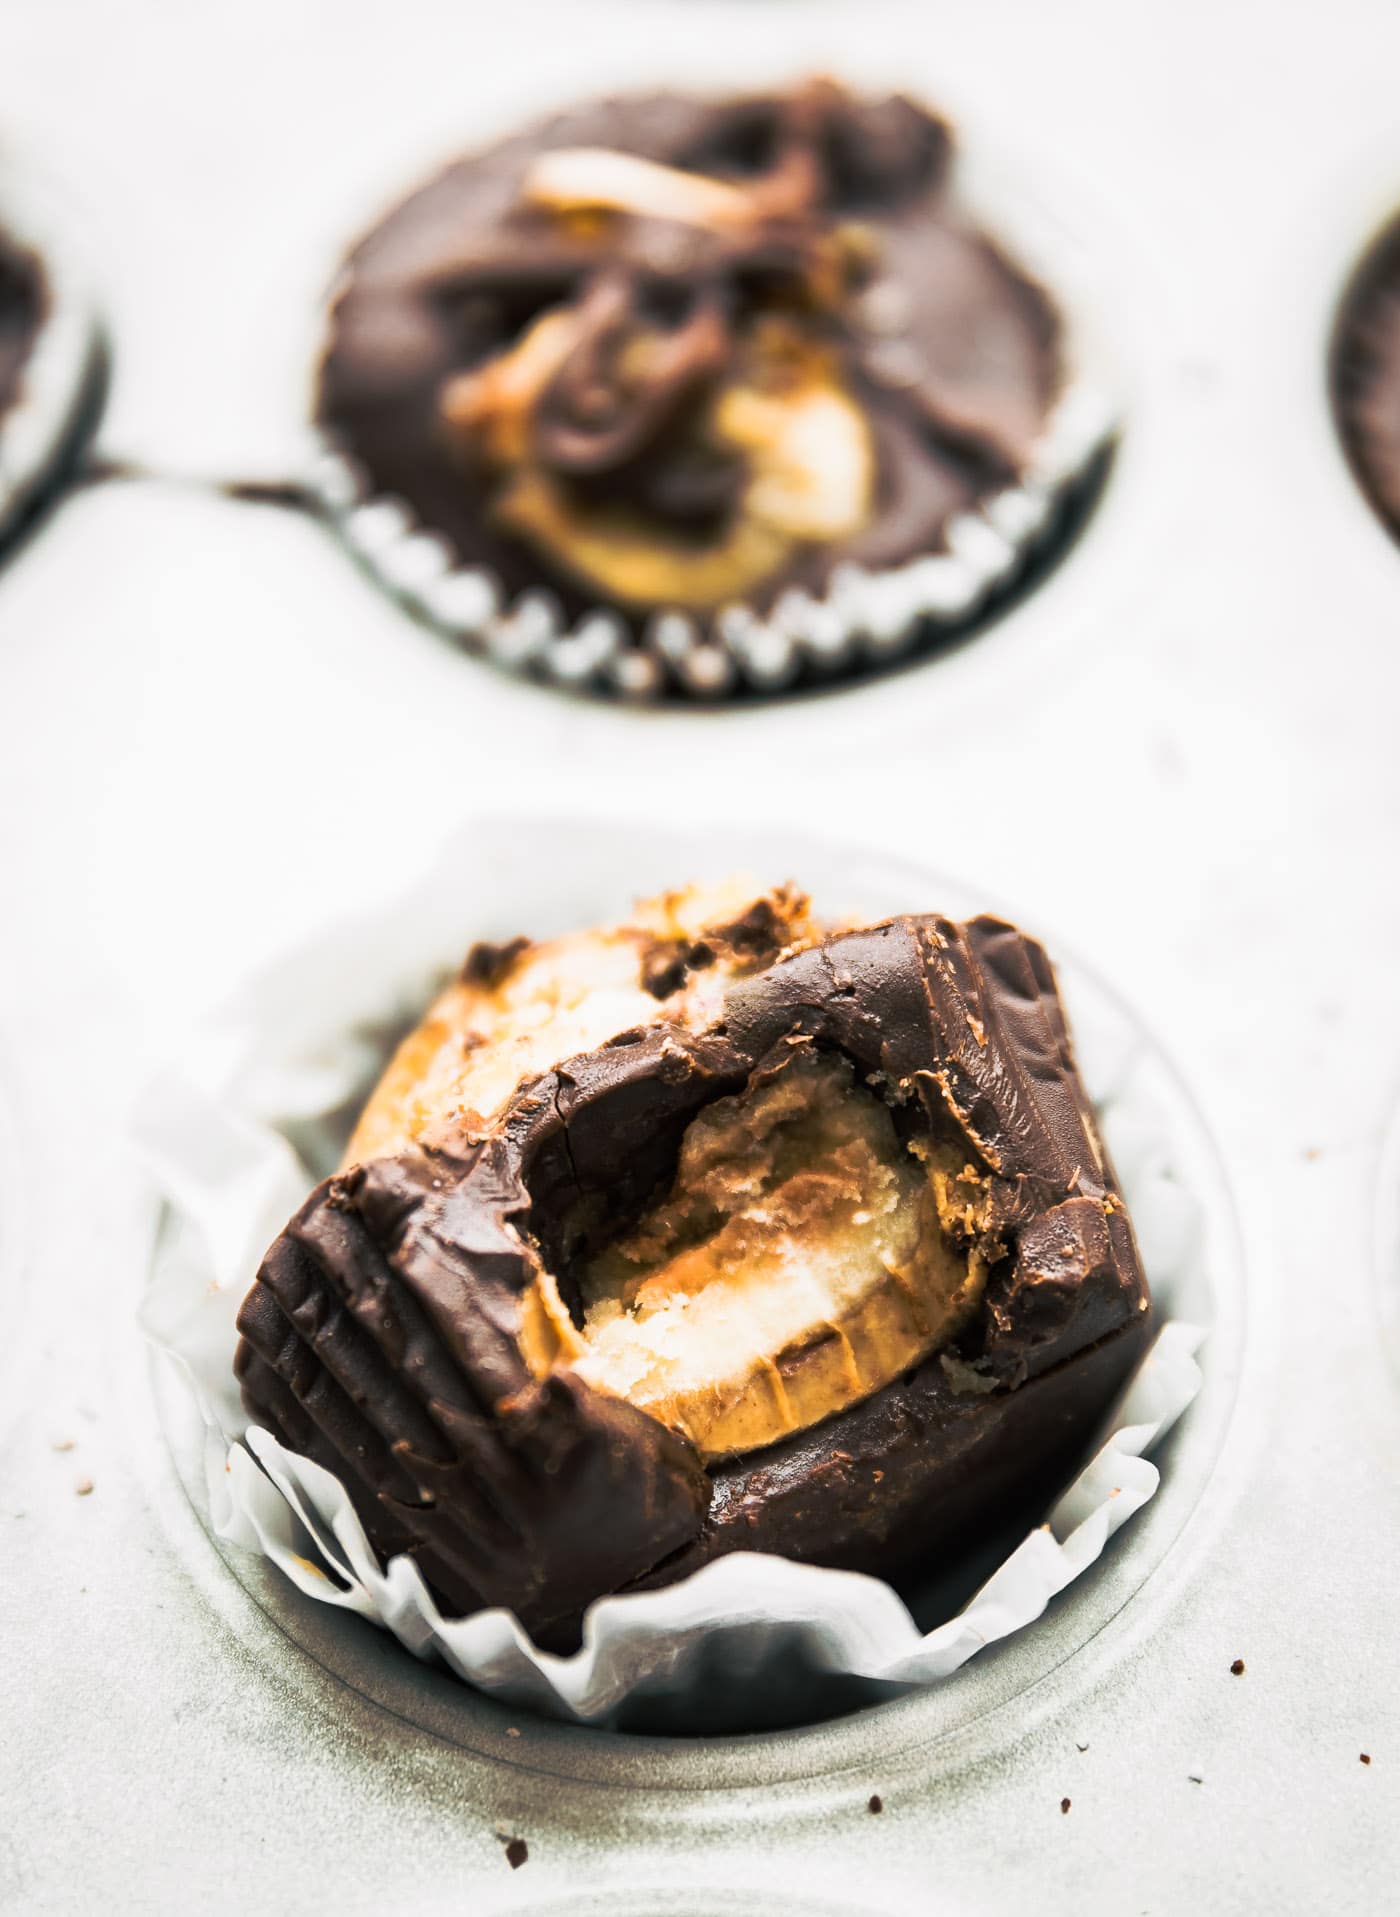 A caramelized banana chocolate almond butter cup with bite taken out to show inside texture sitting sideways in mini muffin tin.